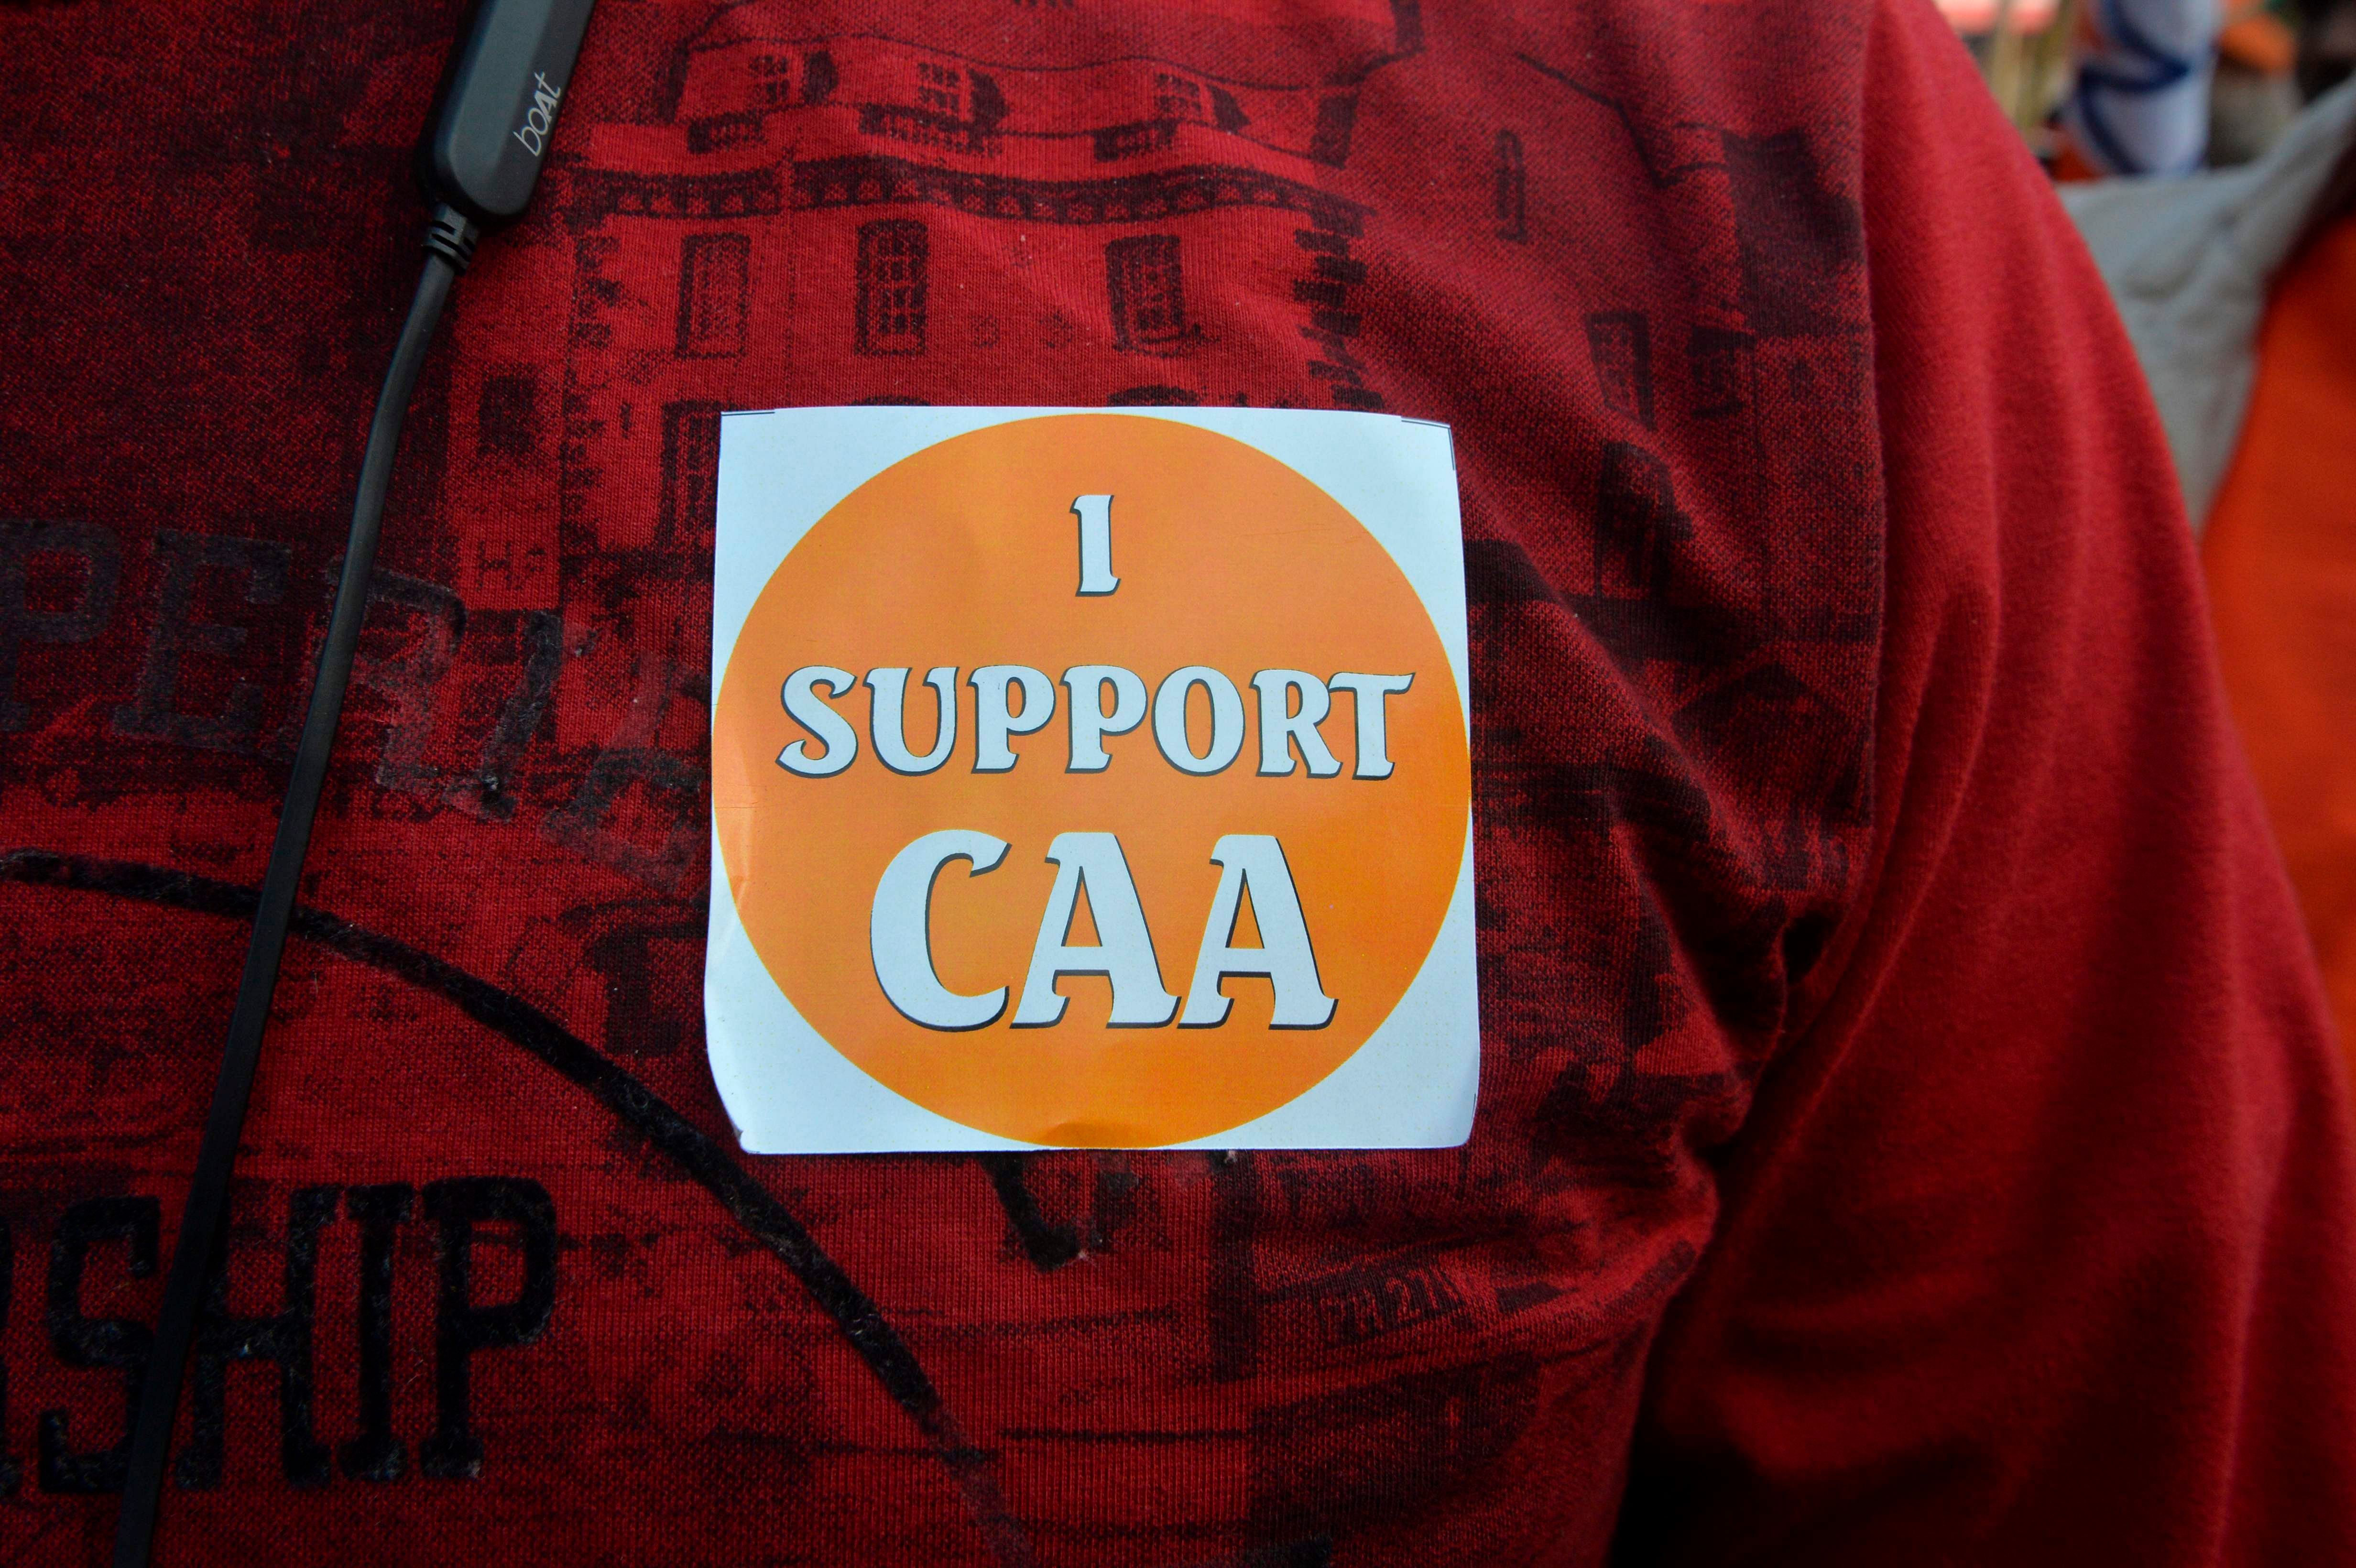 A supporter of the Bharatiya Janata Party (BJP) displays a sticker reading "I Support CAA" during a rally in support of India's new citizenship law in Siliguri. (PTI Photo)